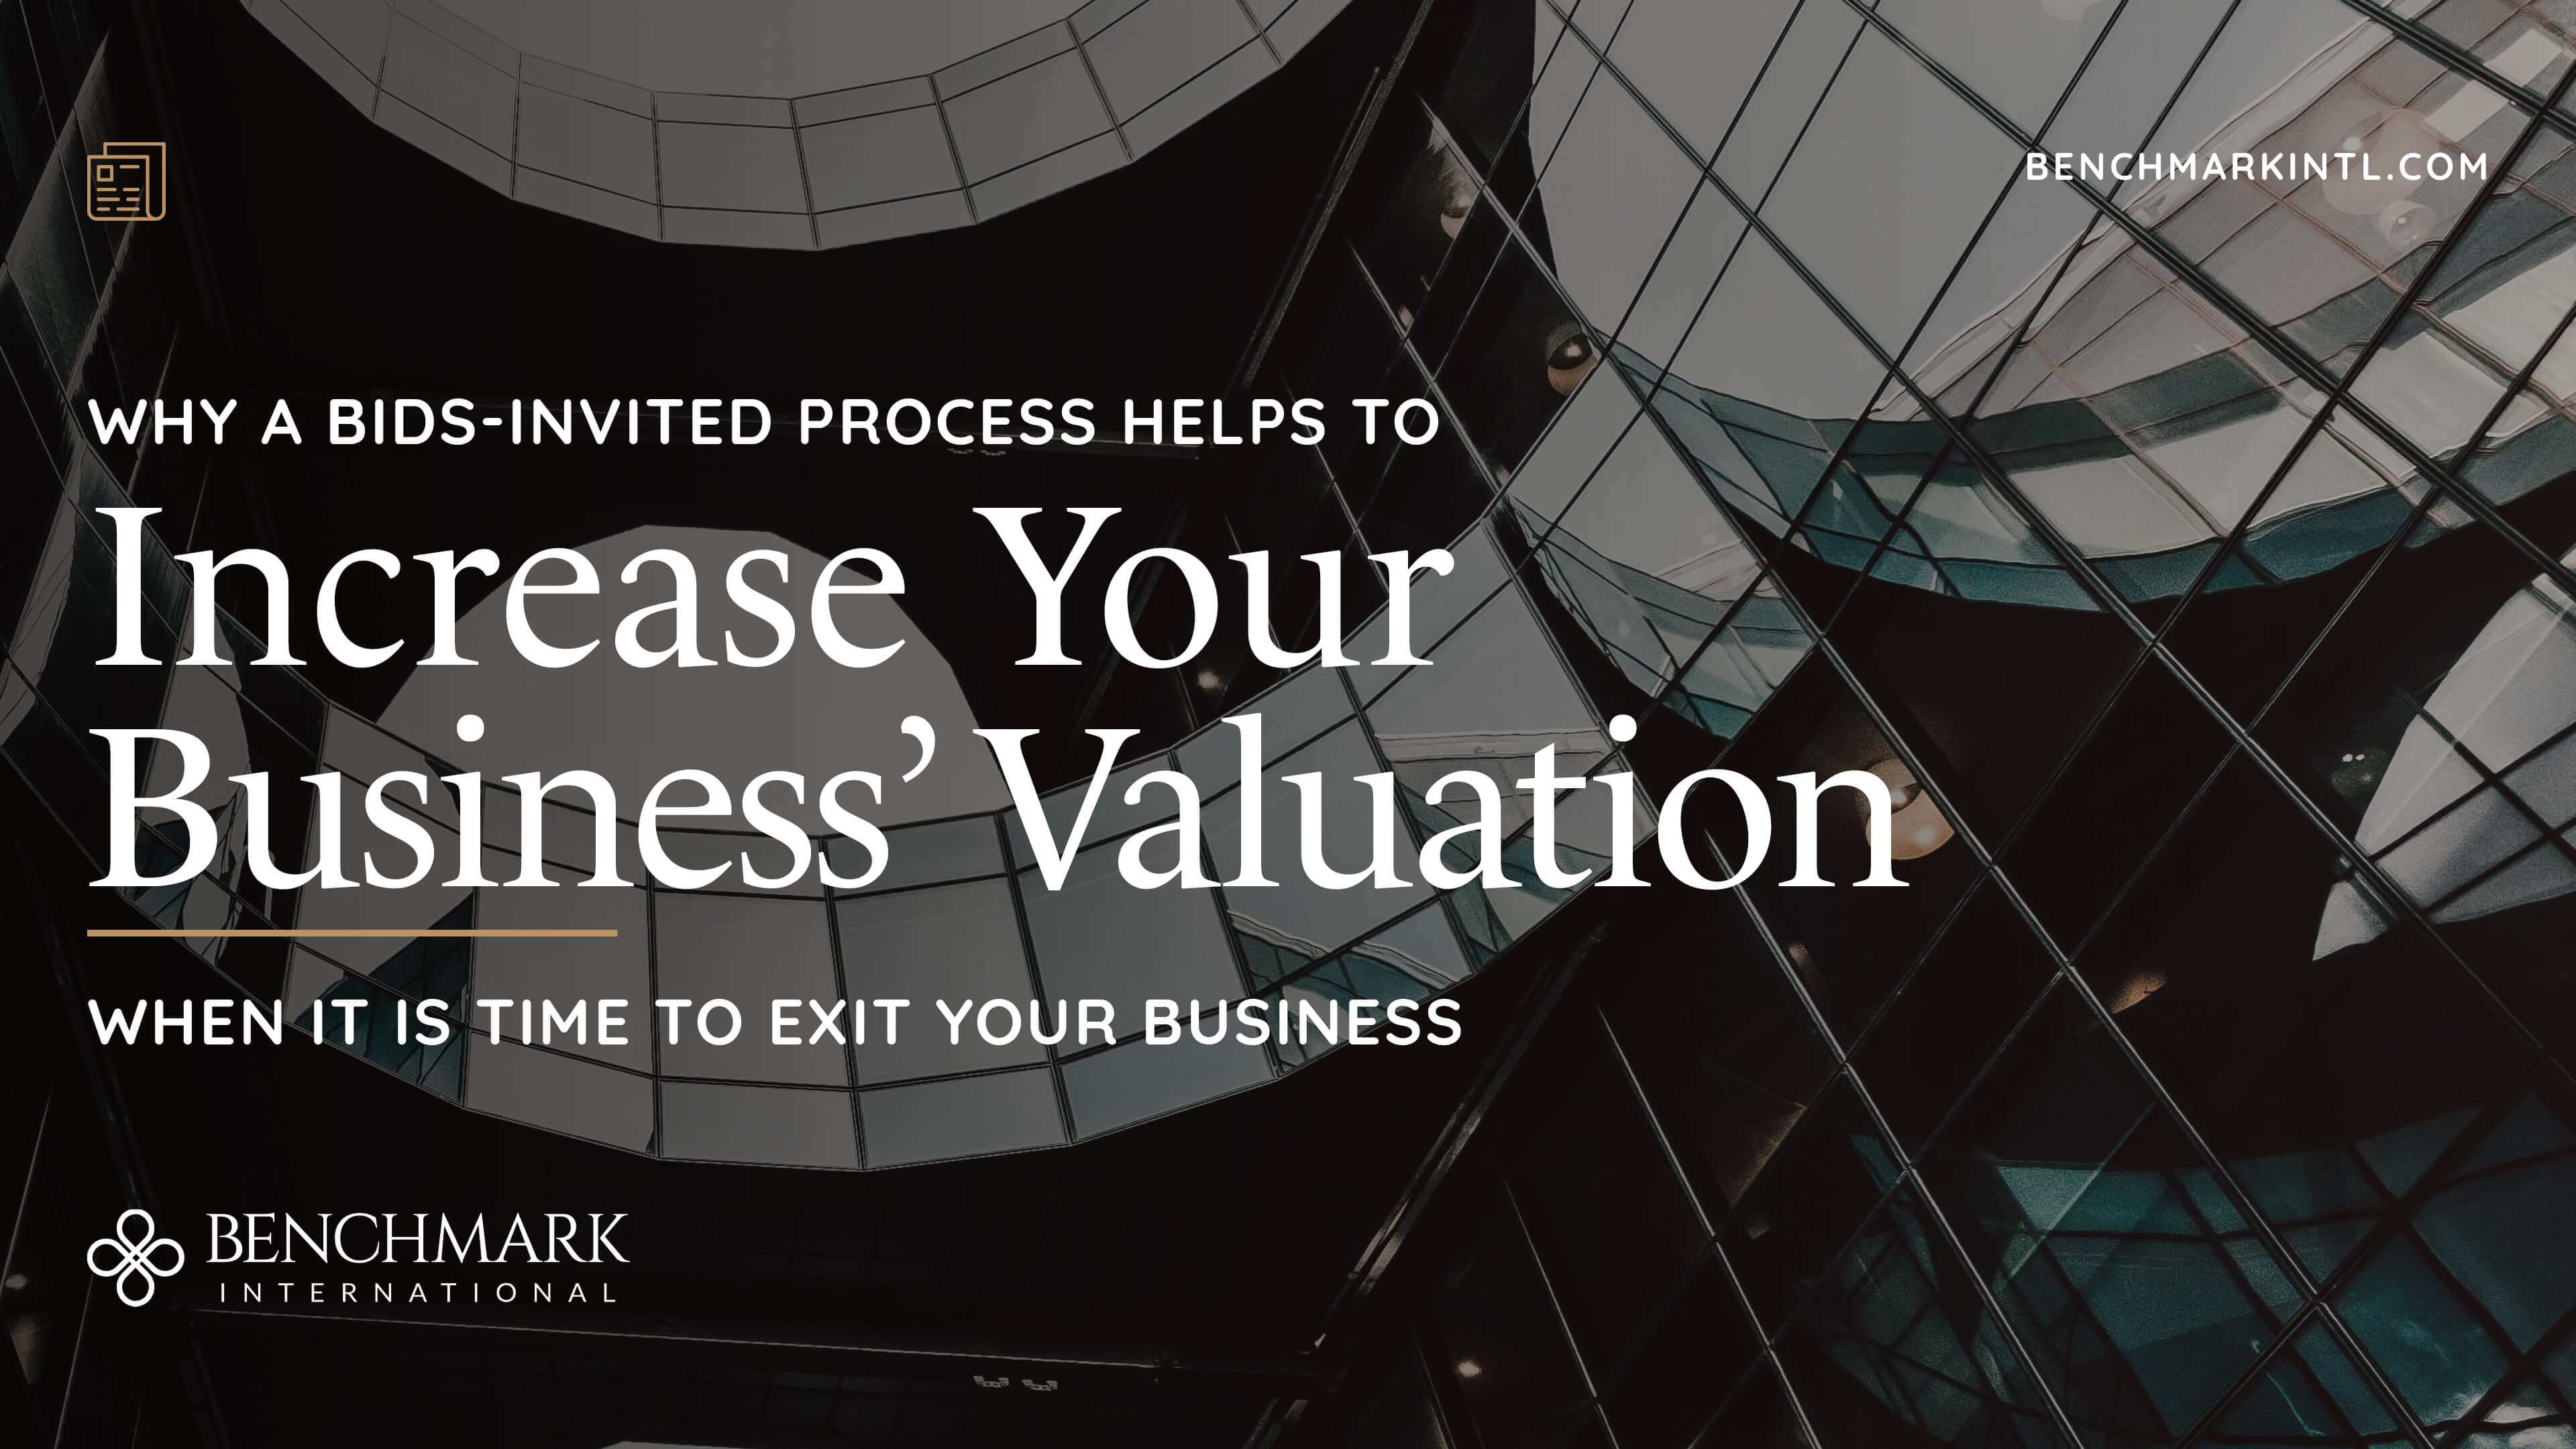 Why A Bids-Invited Process Helps to Increase Your Business’ Valuation When It Is Time to Exit Your Business